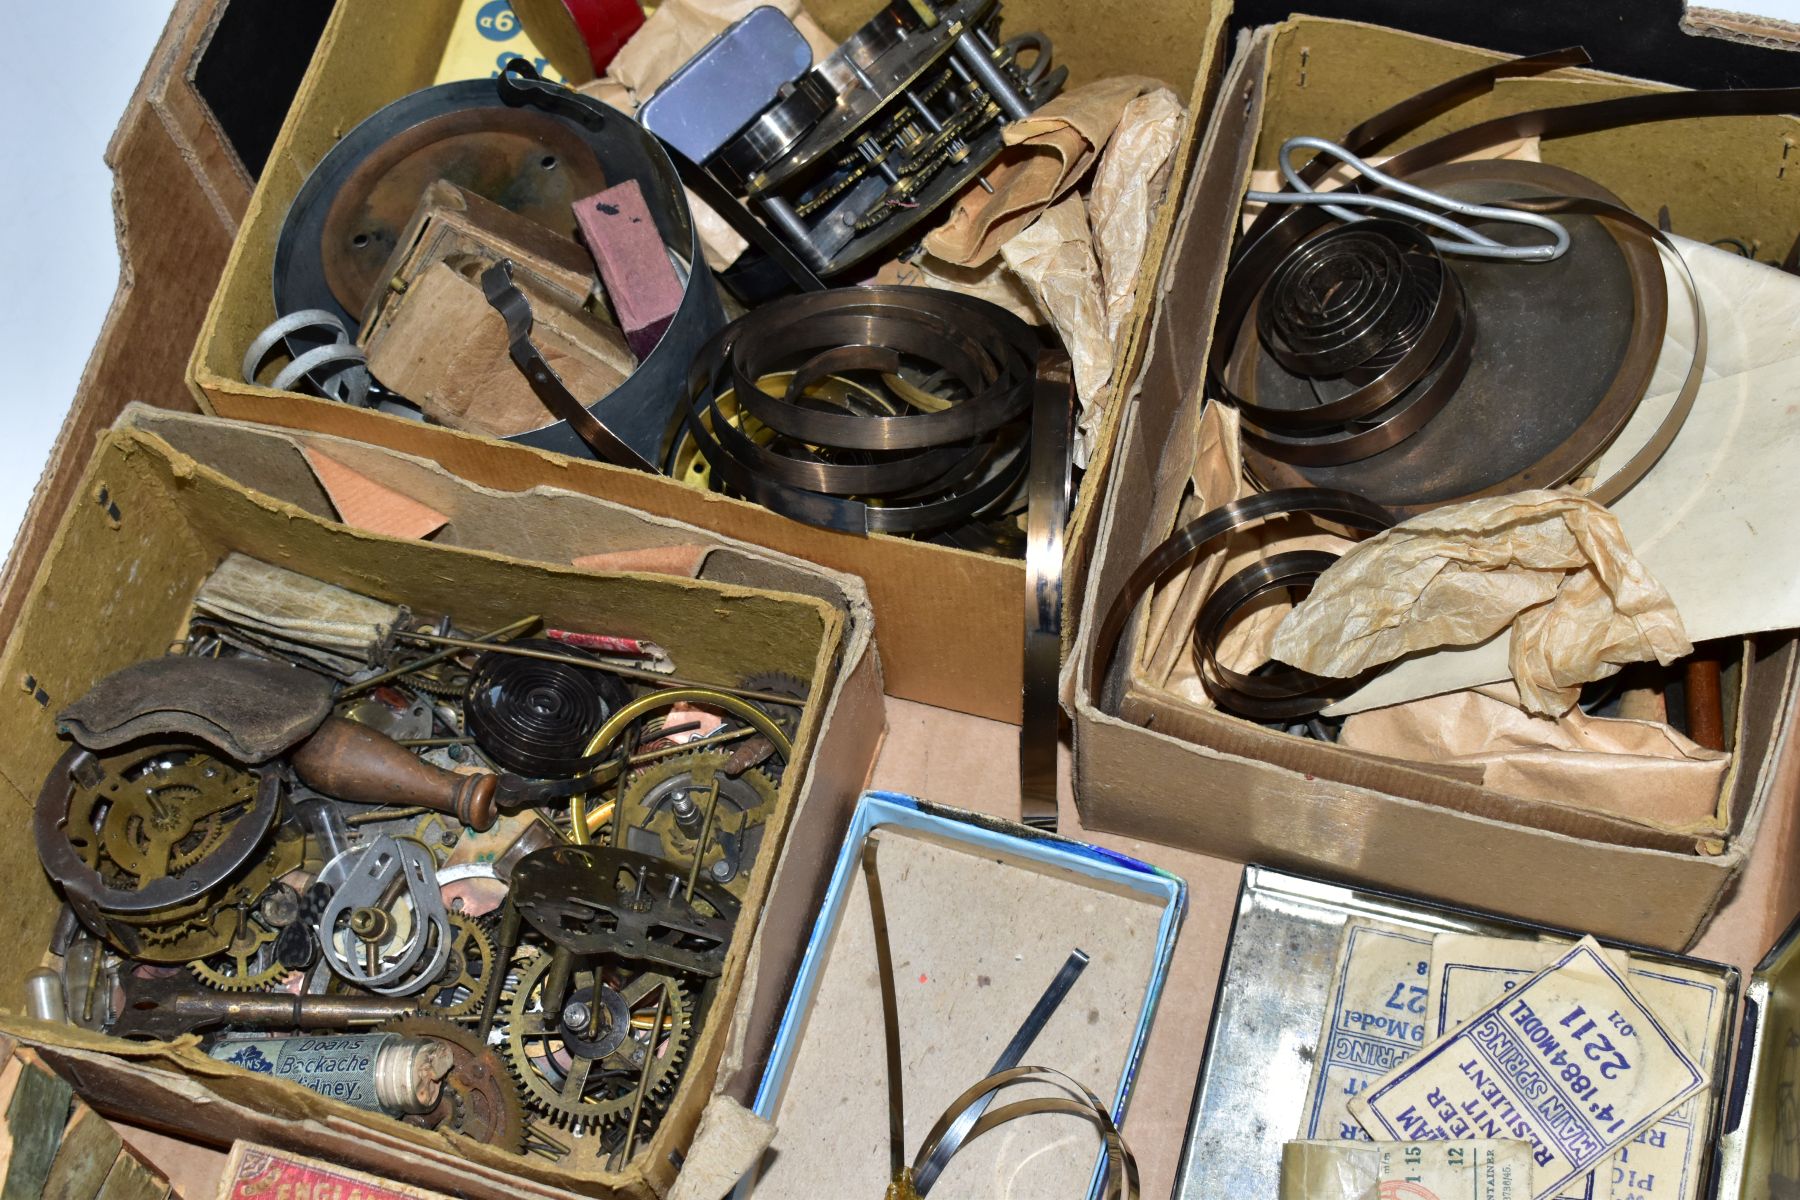 TWO BOXES OF ASSORTED WATCH MAKERS PARTS, GLASSES, COGS, SPRINGS, CROWNS, DECONSTTUCTED WATCH - Image 14 of 30